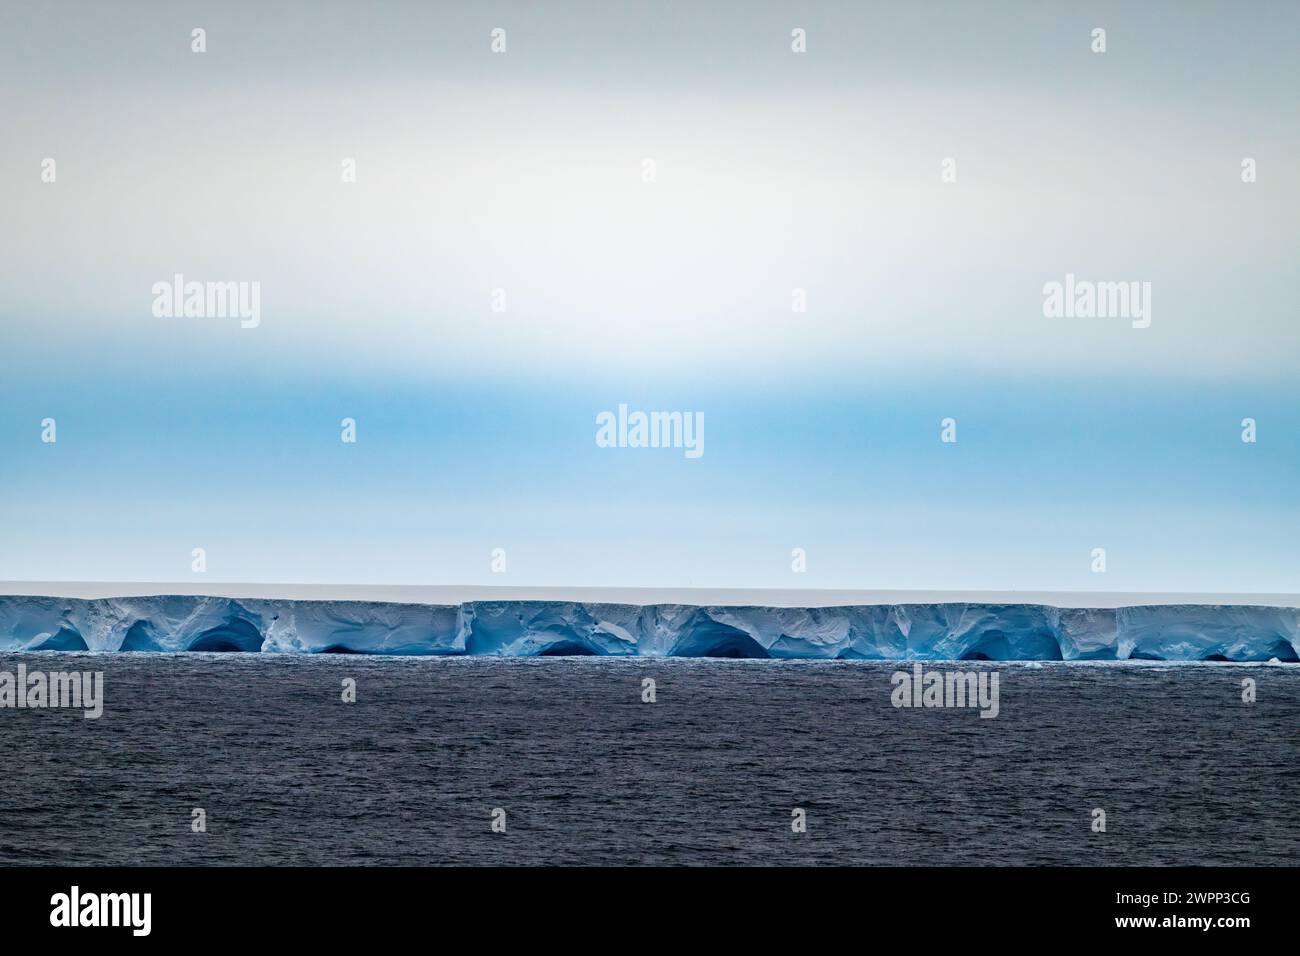 A23a, the largest iceberg in the world, off the coast of Antarctica. Stock Photo